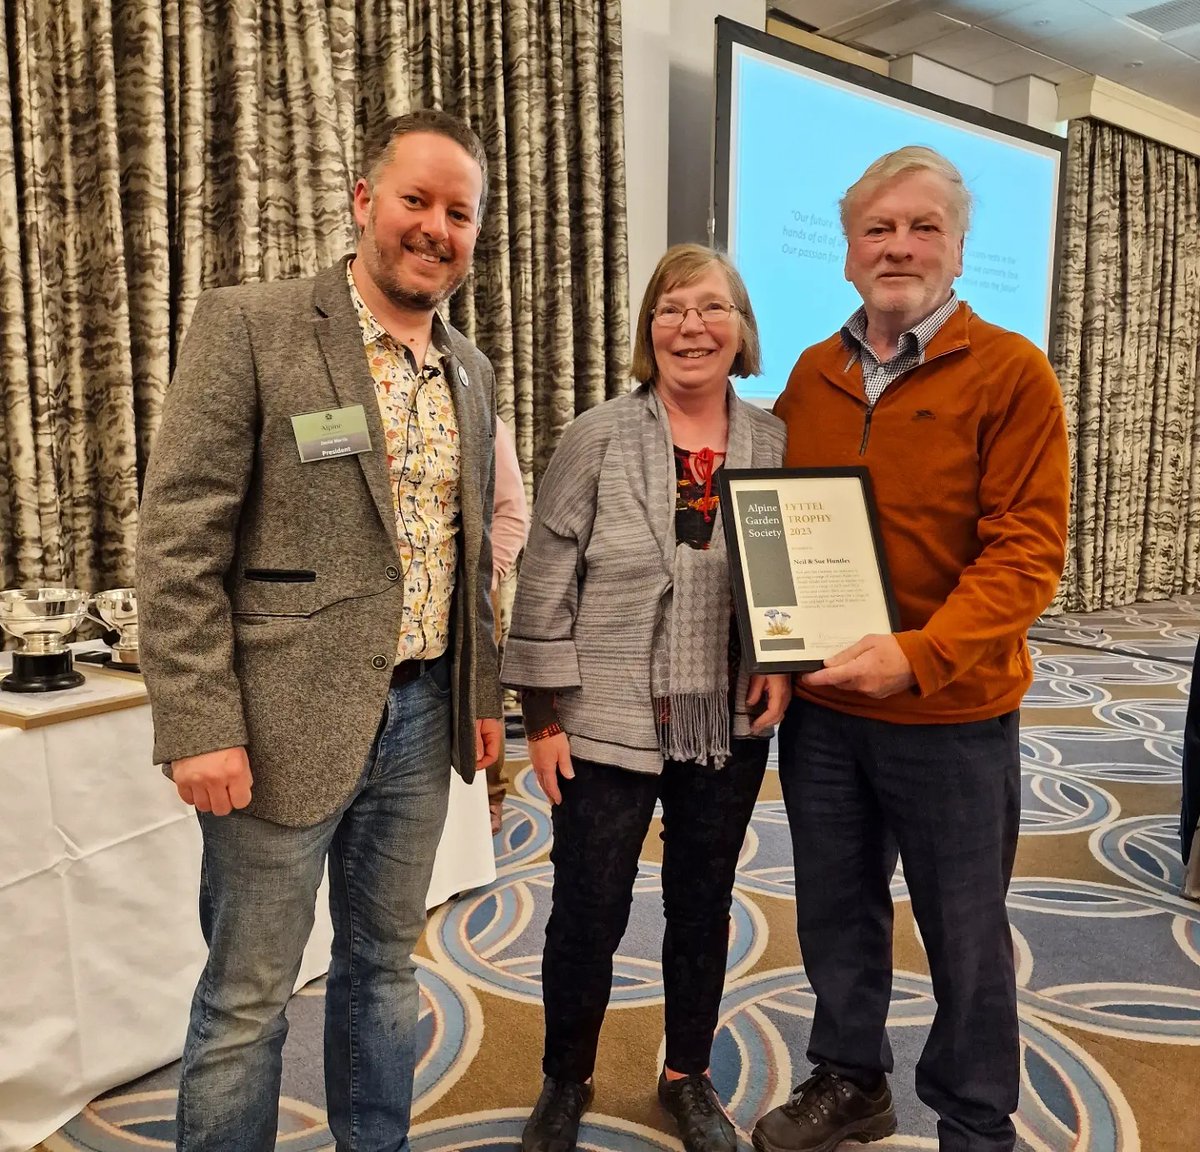 Sue and I were thrilled to be awarded one of the Alpine Garden Societies highest awards at the AGM yesterday - The Lyttel Trophy - in recognition of our being 'Stalwarts in growing a range of Alpines, Bulbs and Dwarf Shrubs and supporters of a range of AGS and SRGC Shows.'